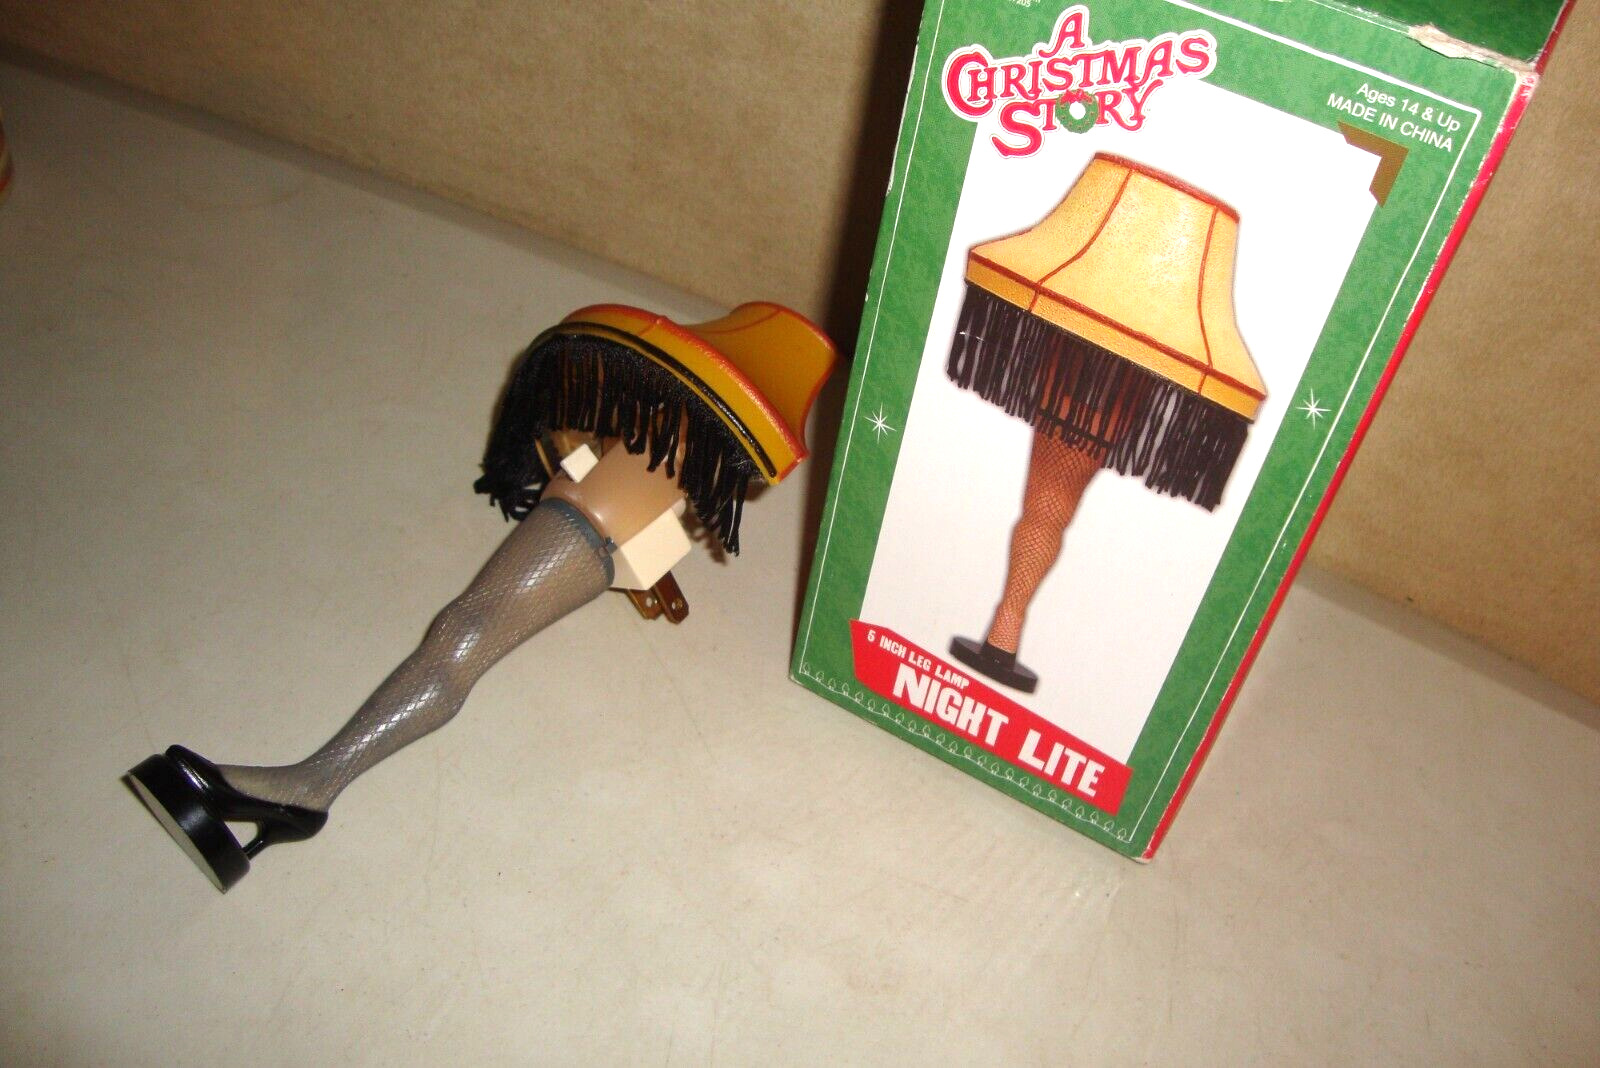 A Christmas Story Leg Lamp Night Lite 5 In. By Neca